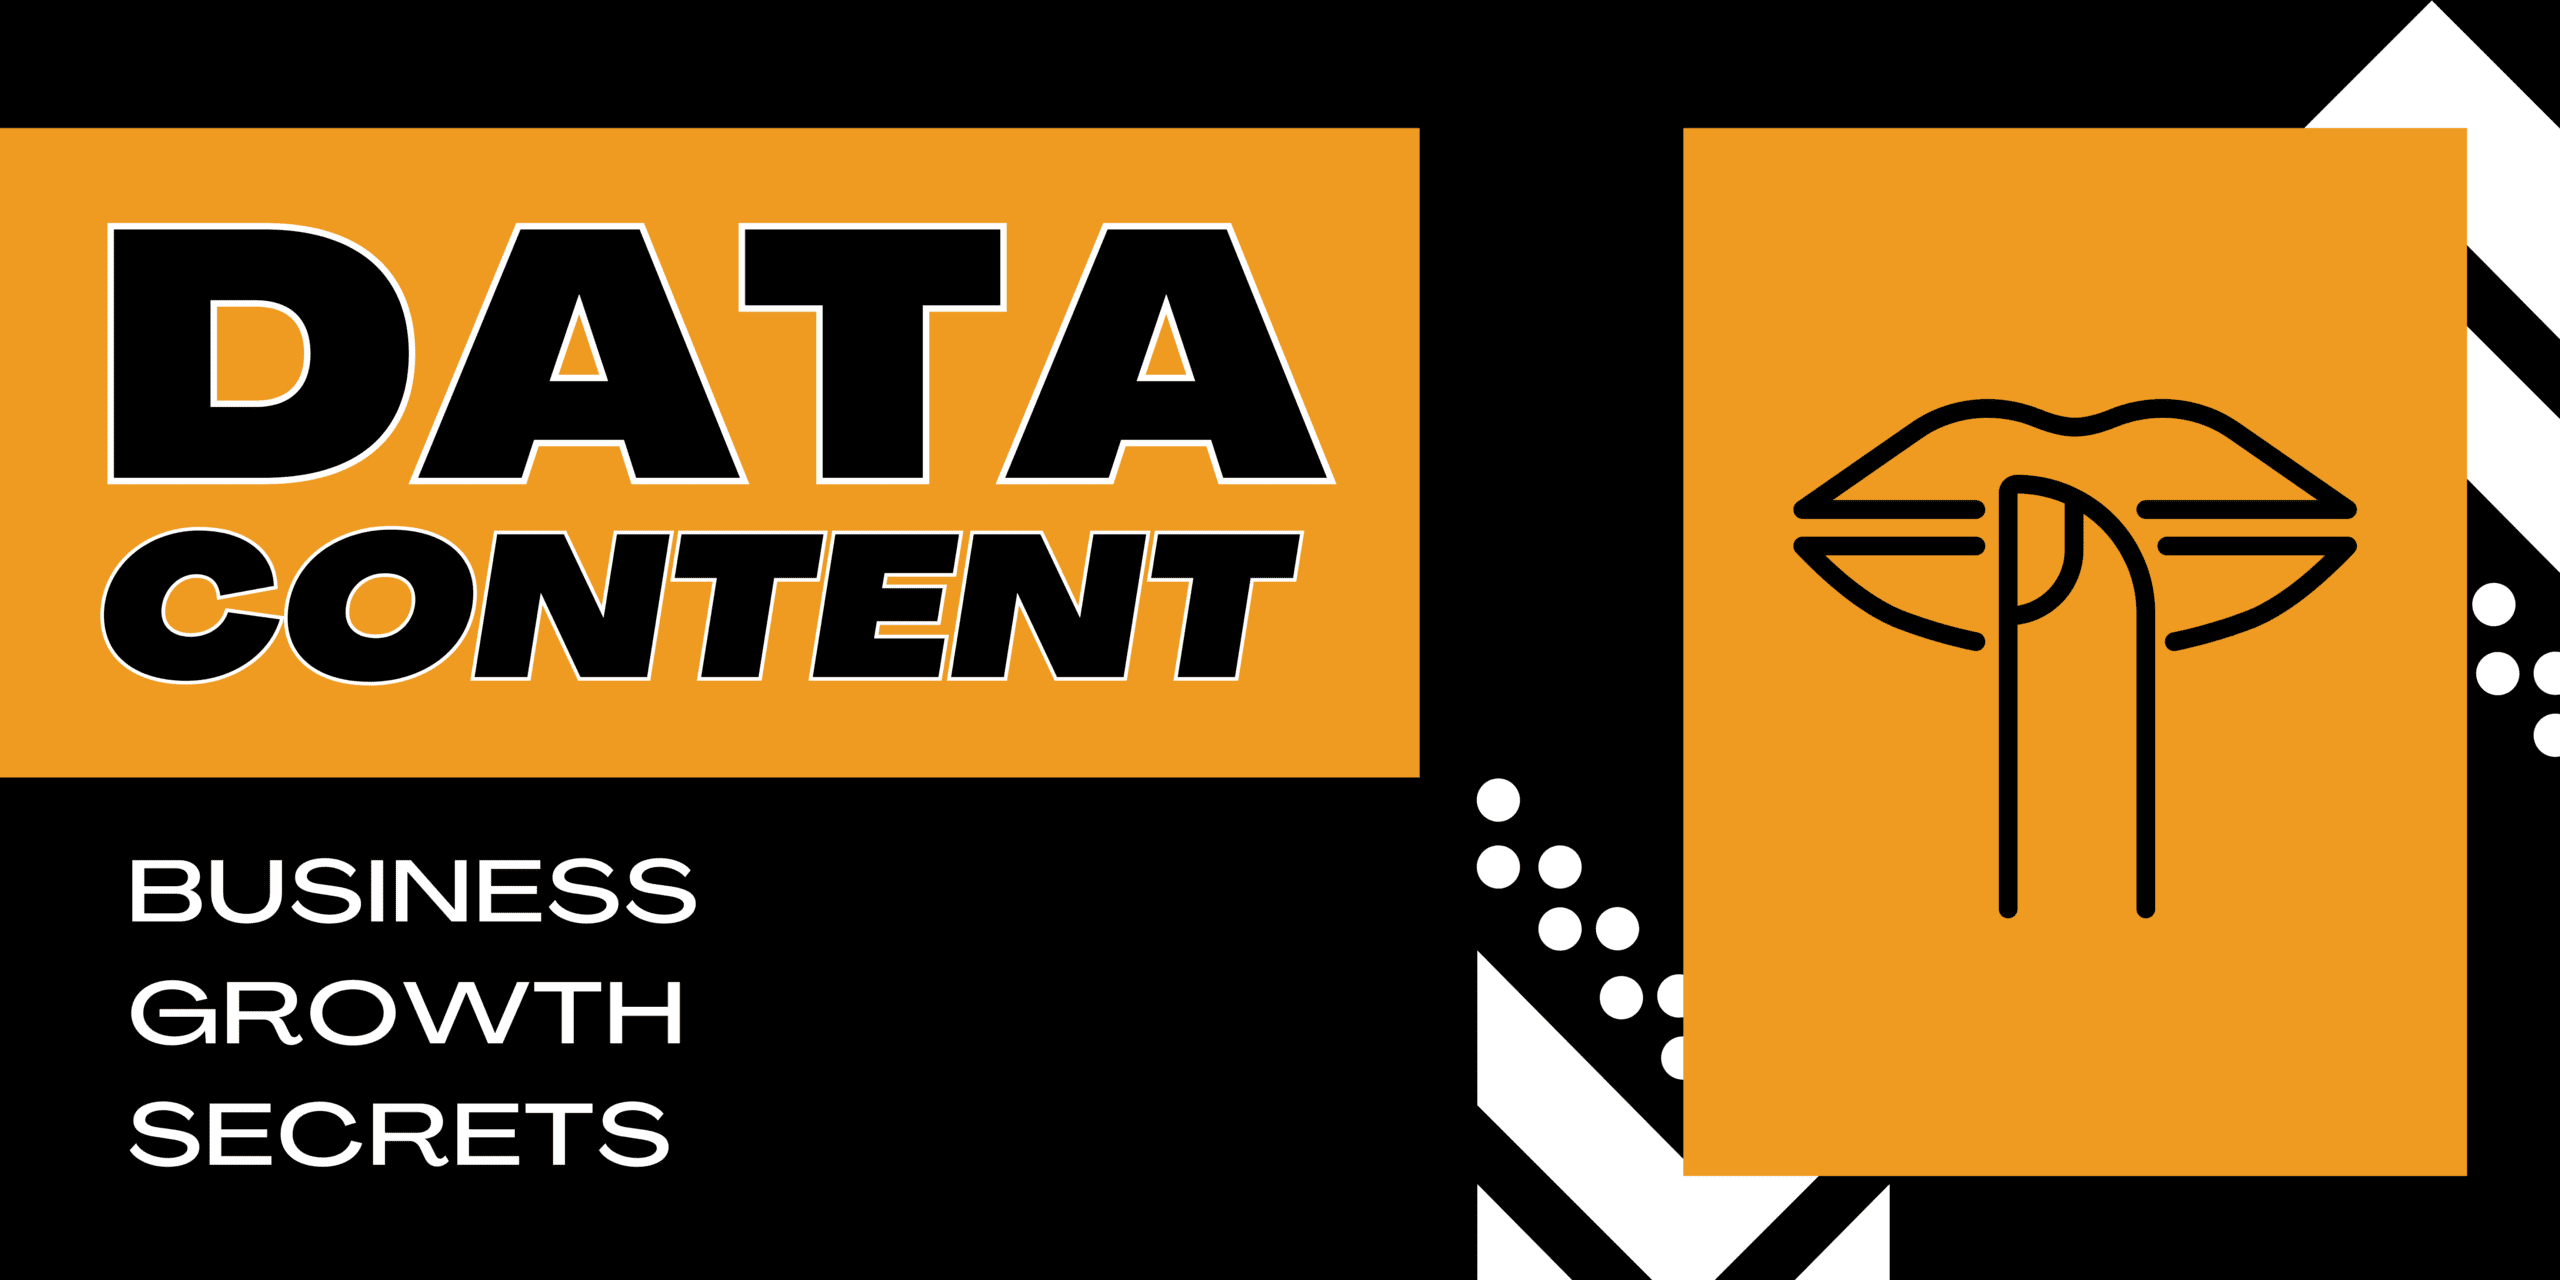 What is data content and how can you use it to grow your data business?